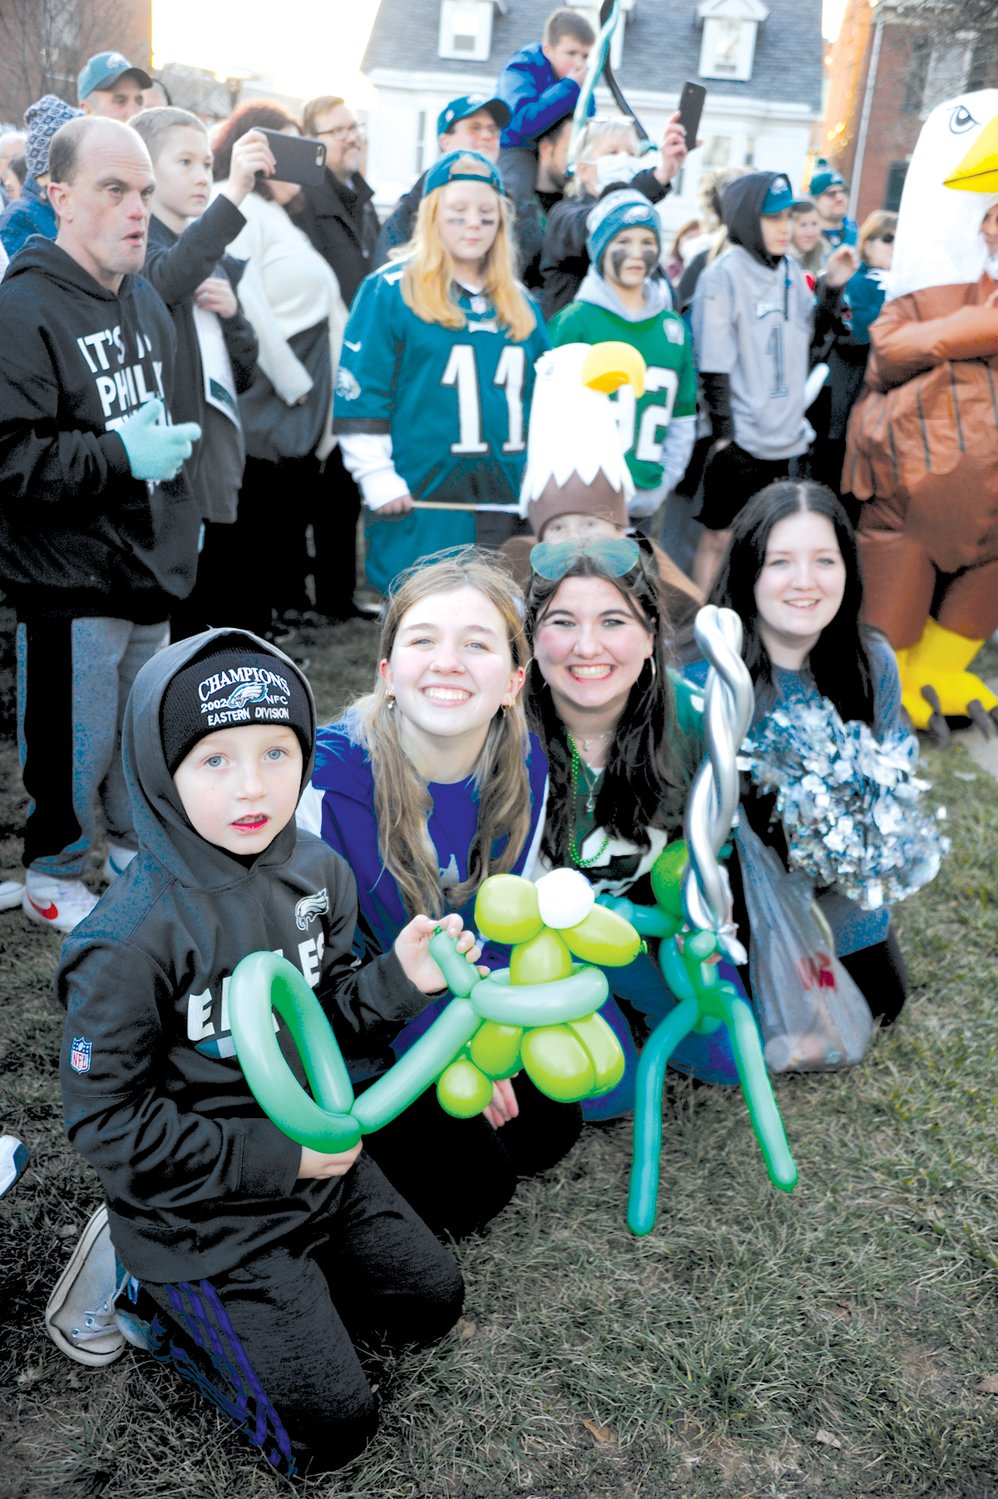 Balloon artists Larry and Joanie Mohr spent Friday’s “Bucks County Loves the Birds” pep rally on the lawn of the old county courthouse in Doylestown making Eagles-inspired balloon creations for the young fans in attendance.